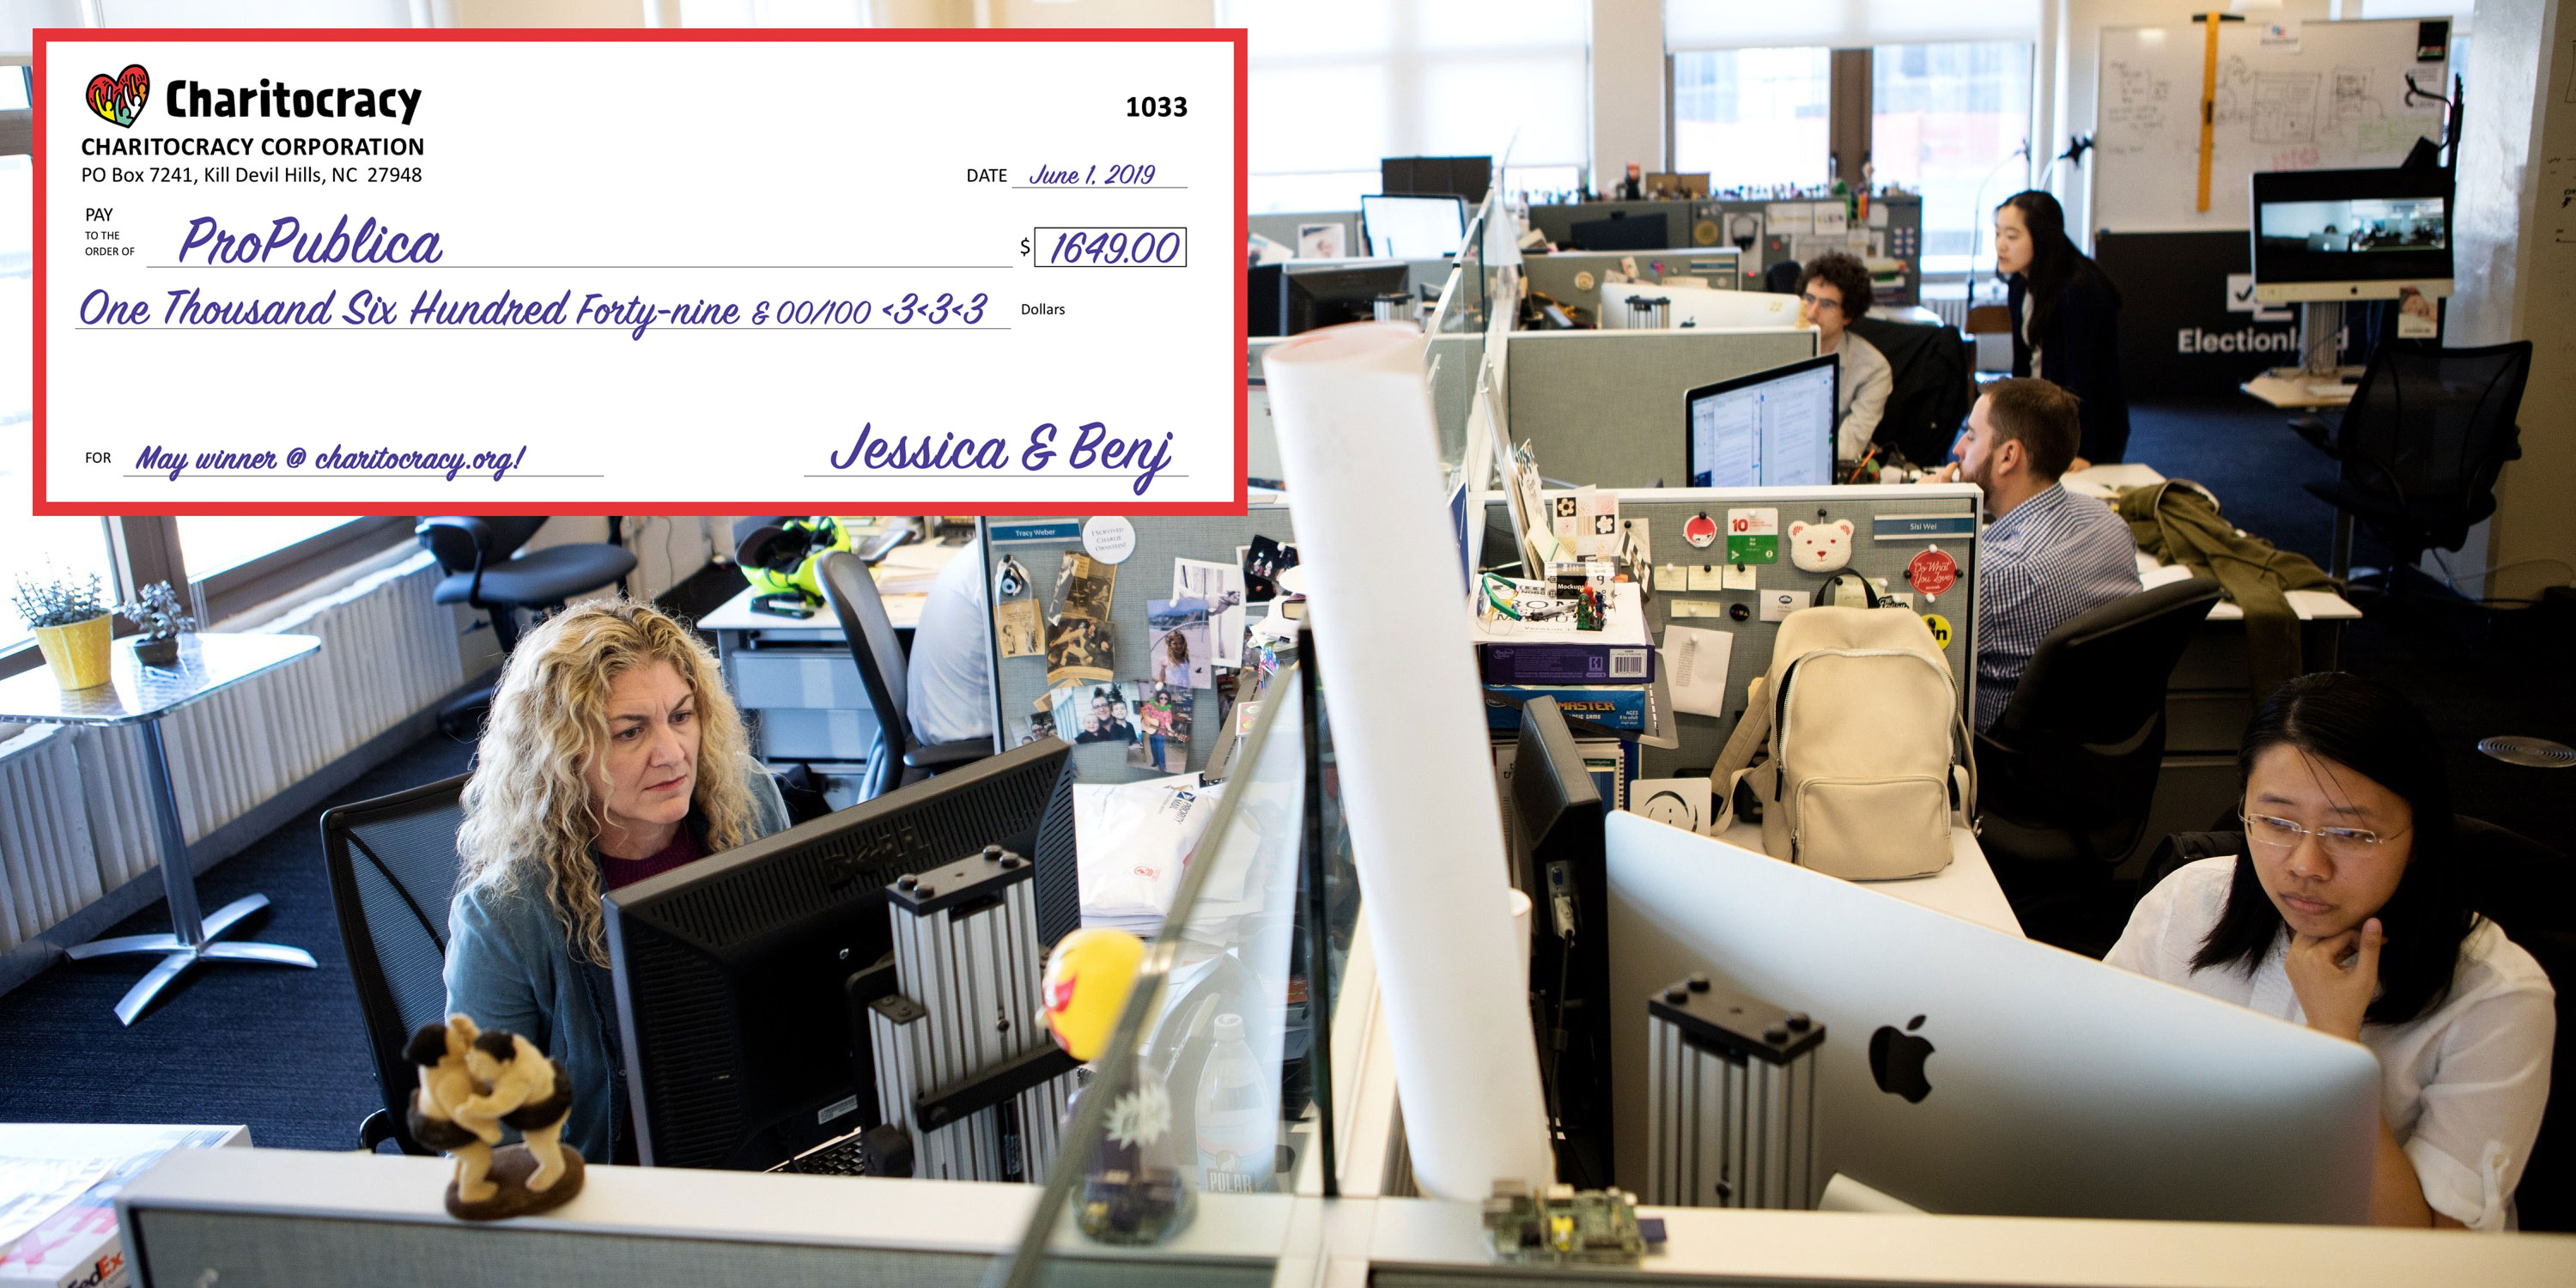 Charitocracy's 33rd check to May winner ProPublica for $1649